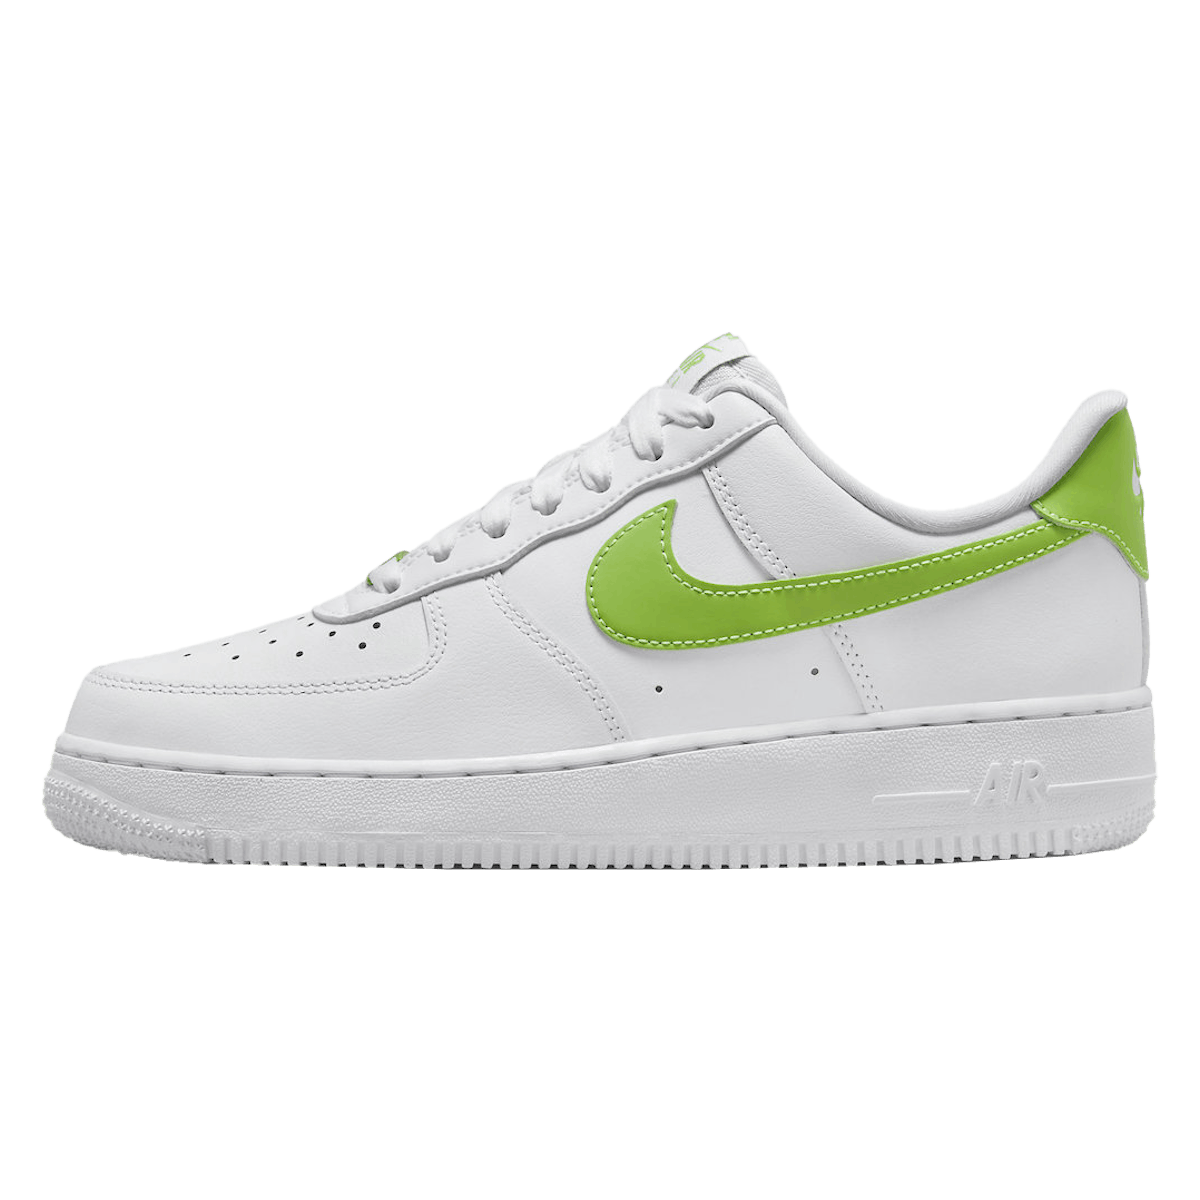 Nike Air Force 1 Low WMNS "Action Green"